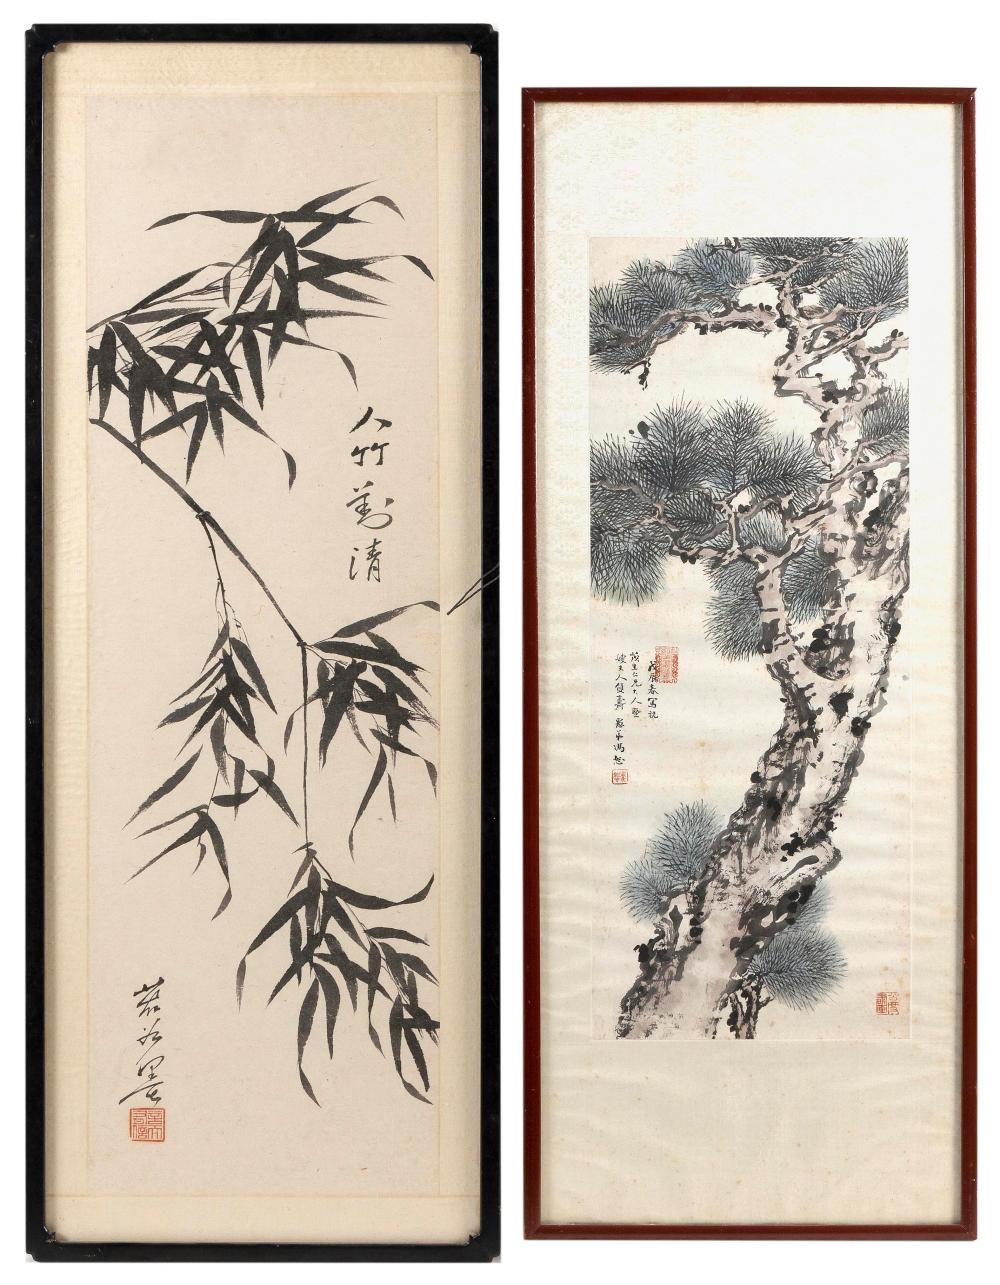 TWO JAPANESE SCROLL PAINTINGS ON 34ca73